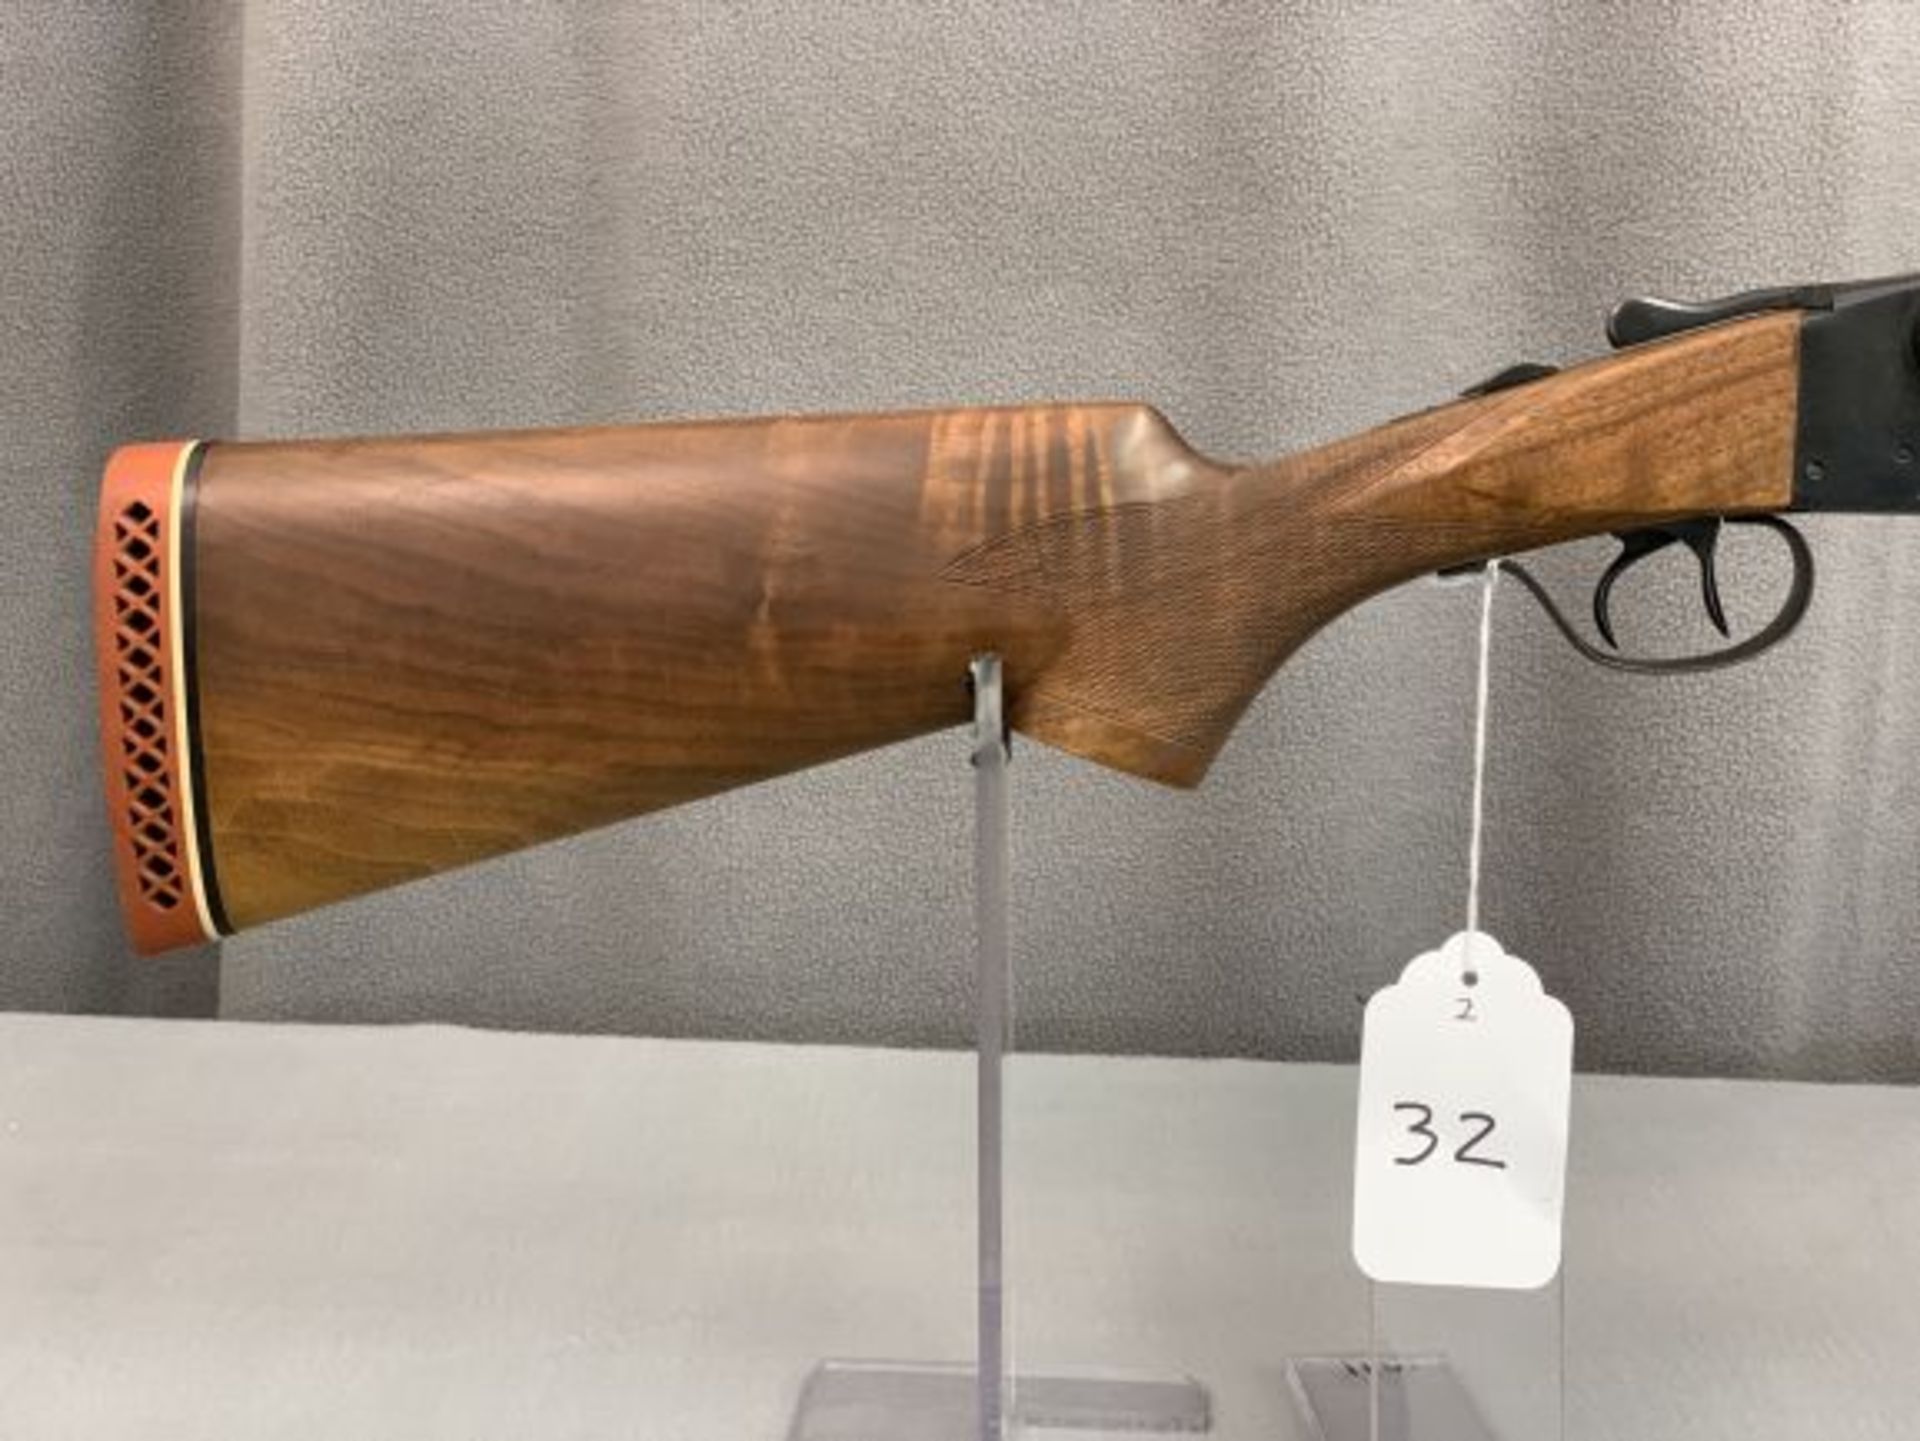 32. Lefever 12ga Side-By-Side, Double Triggers, 28" Barrels SN: Not Visible - Image 2 of 13